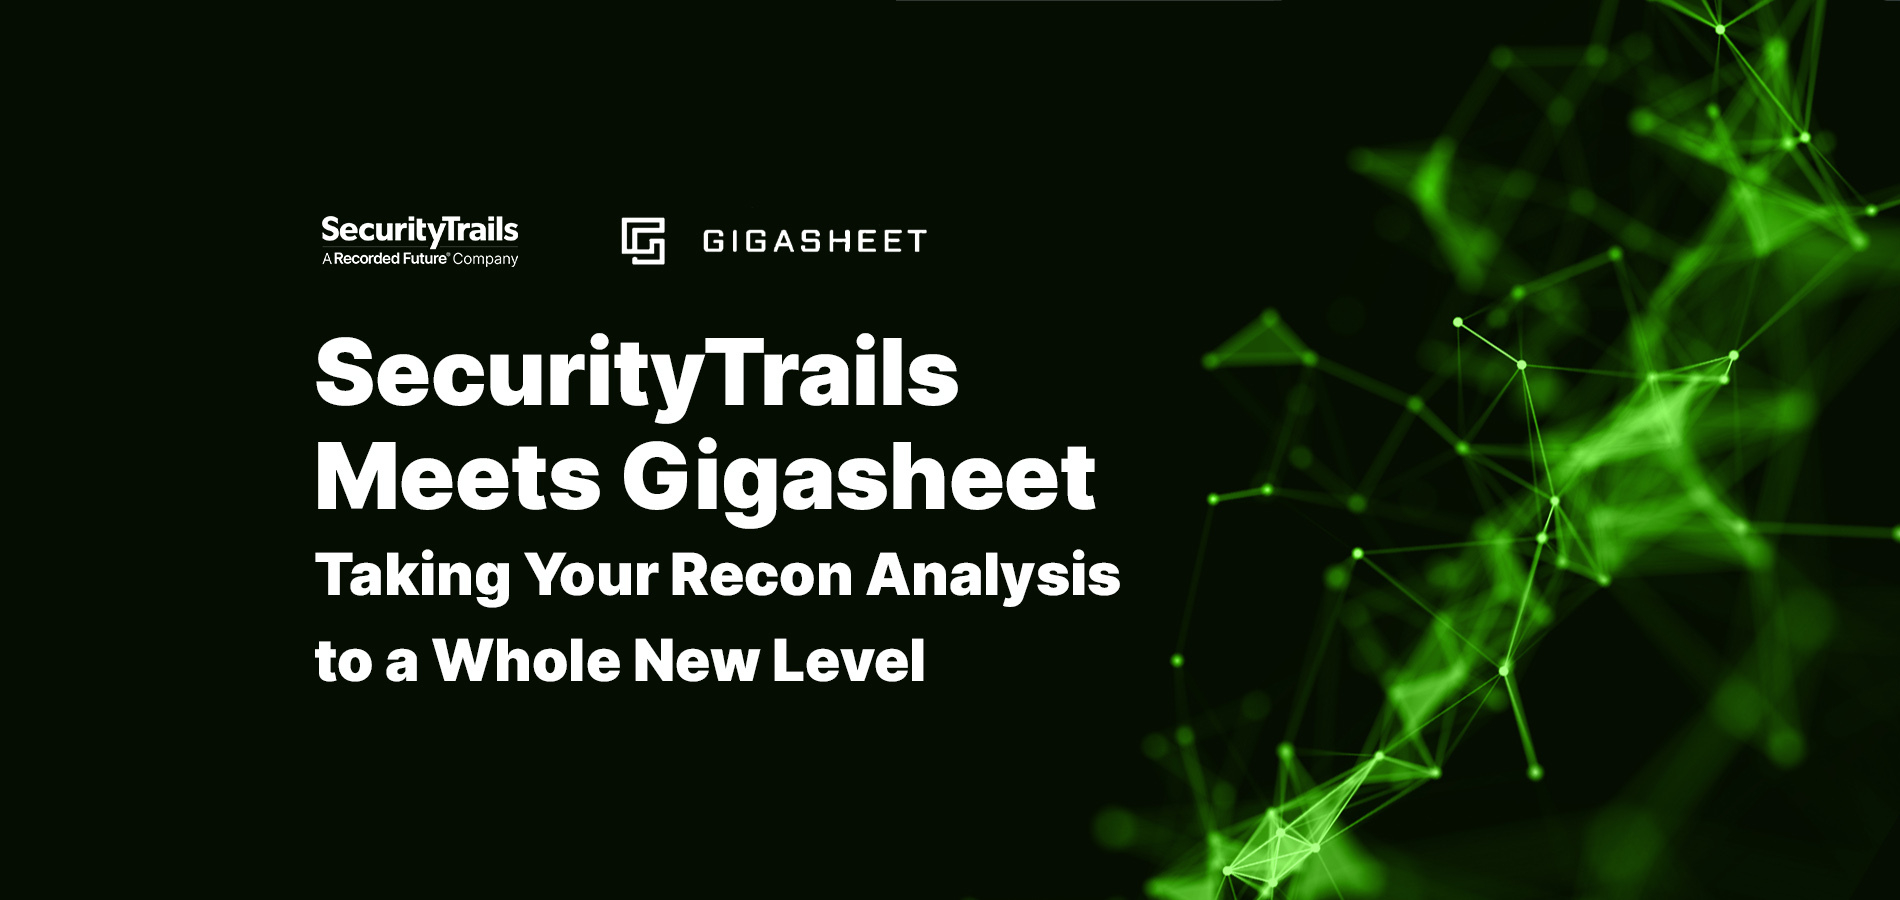 SecurityTrails Meets Gigasheet: Taking Your Recon Analysis to a Whole New Level.